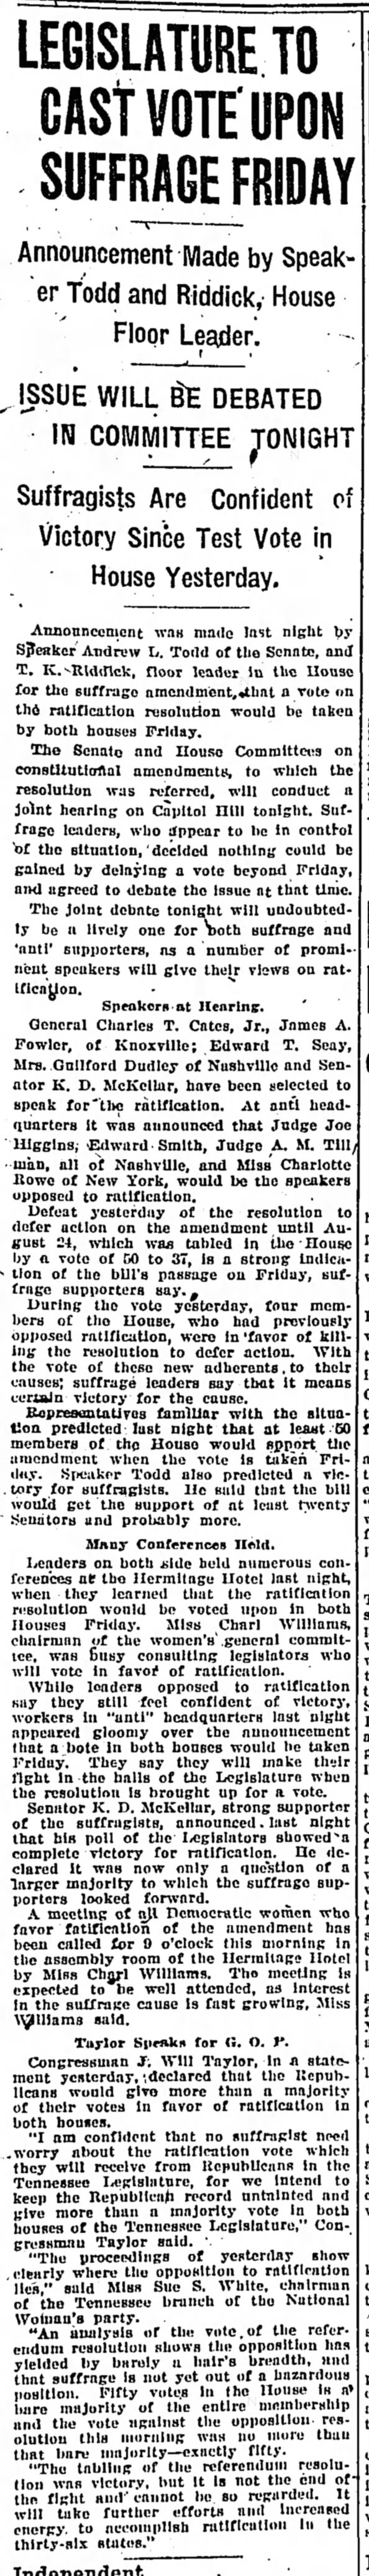 1920 Aug 12 Nashville TN Battle for 19th Amendment TN's Senate and House votes expected to be 50/50